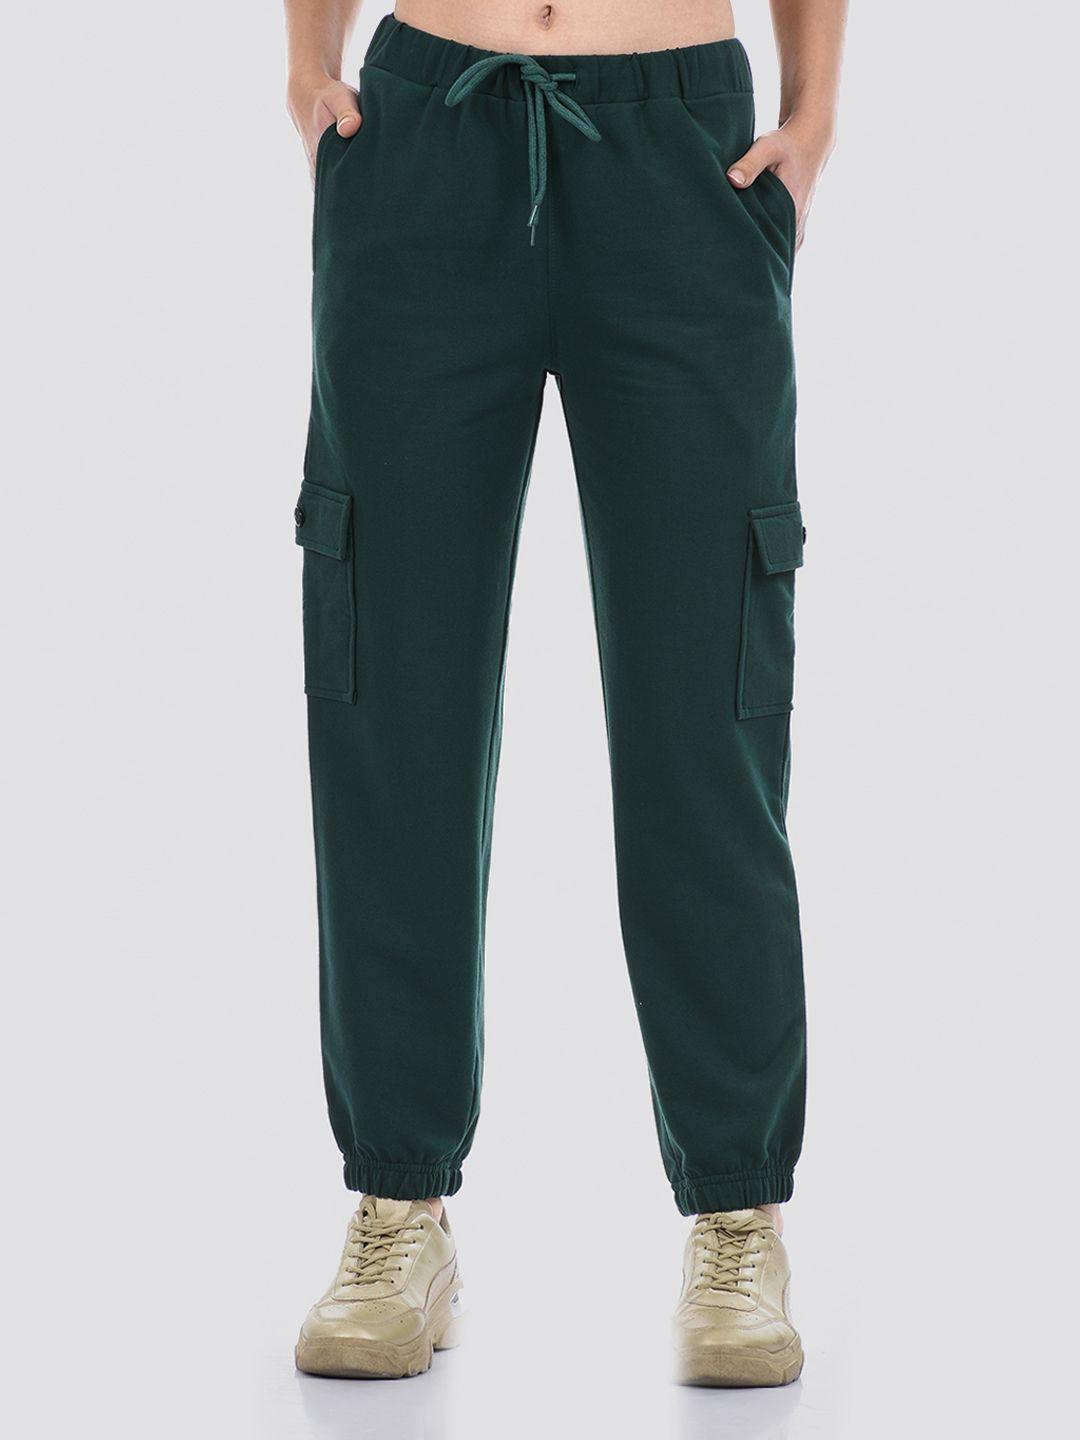 oneway women plus size green solid cotton joggers